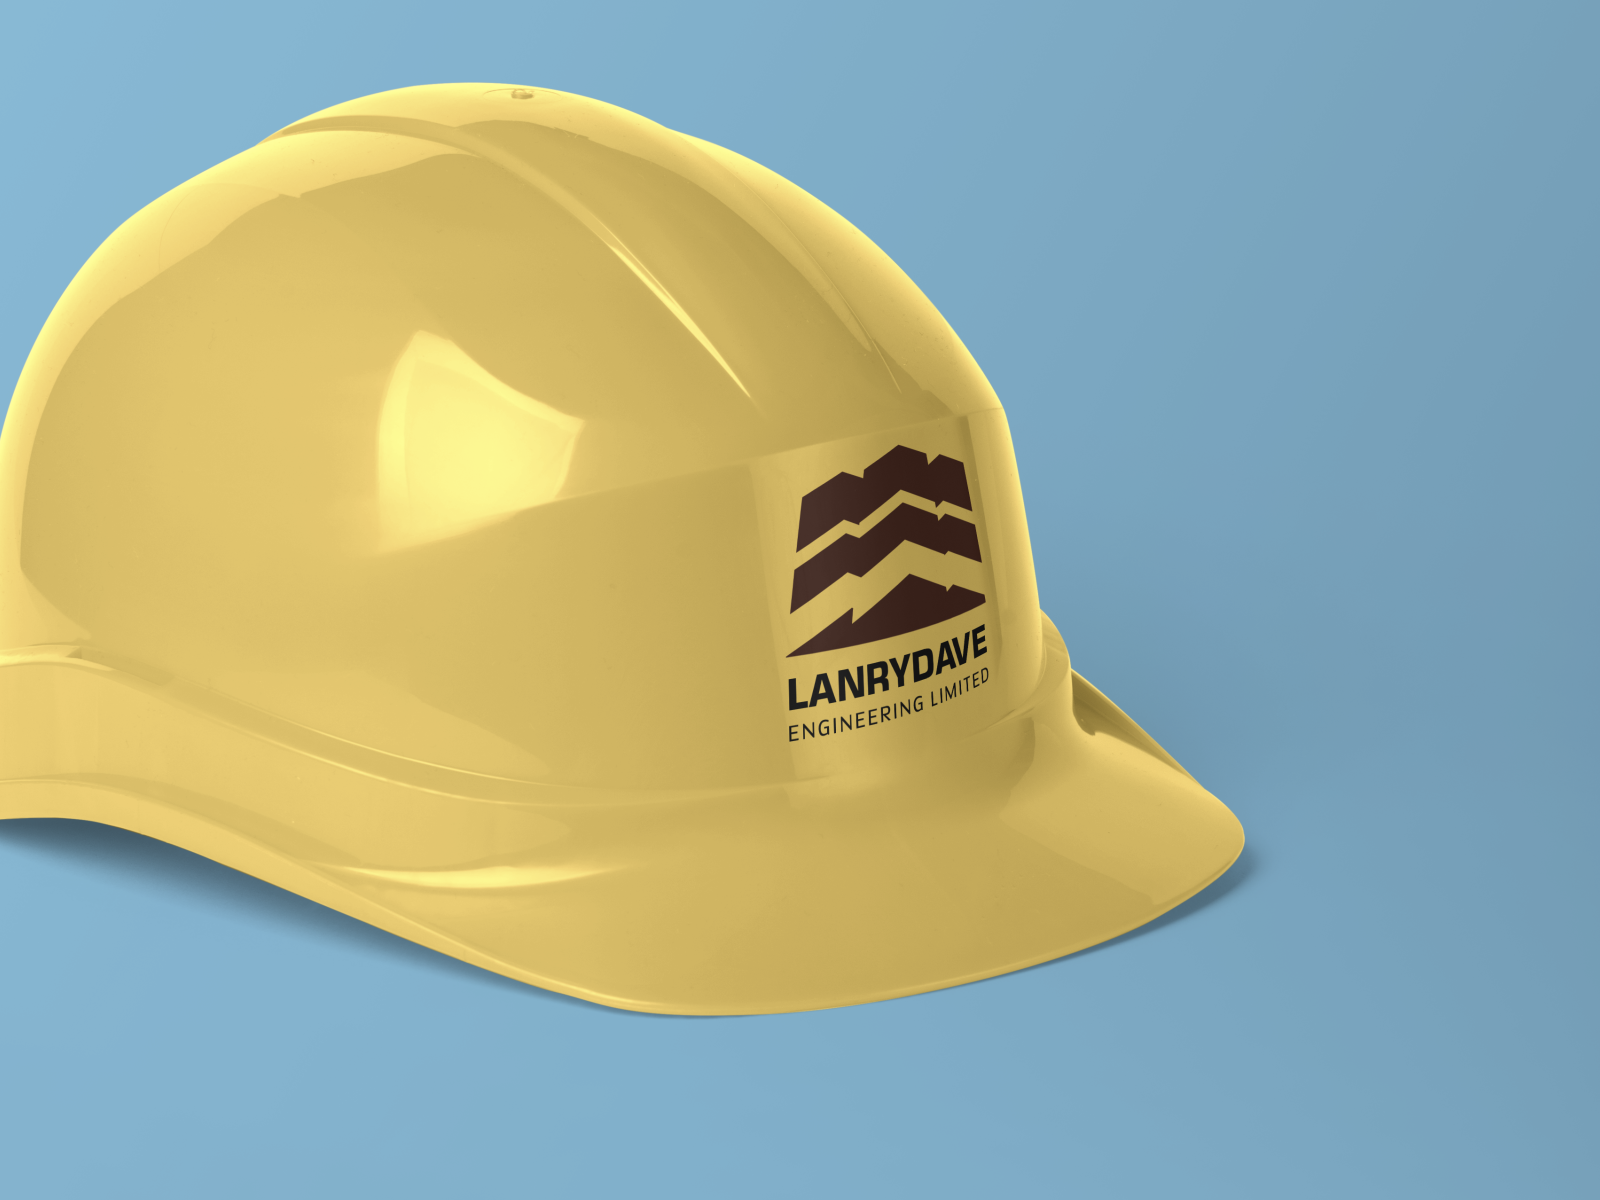 Download Construction Helmet Mockup By Michael Lanry On Dribbble PSD Mockup Templates